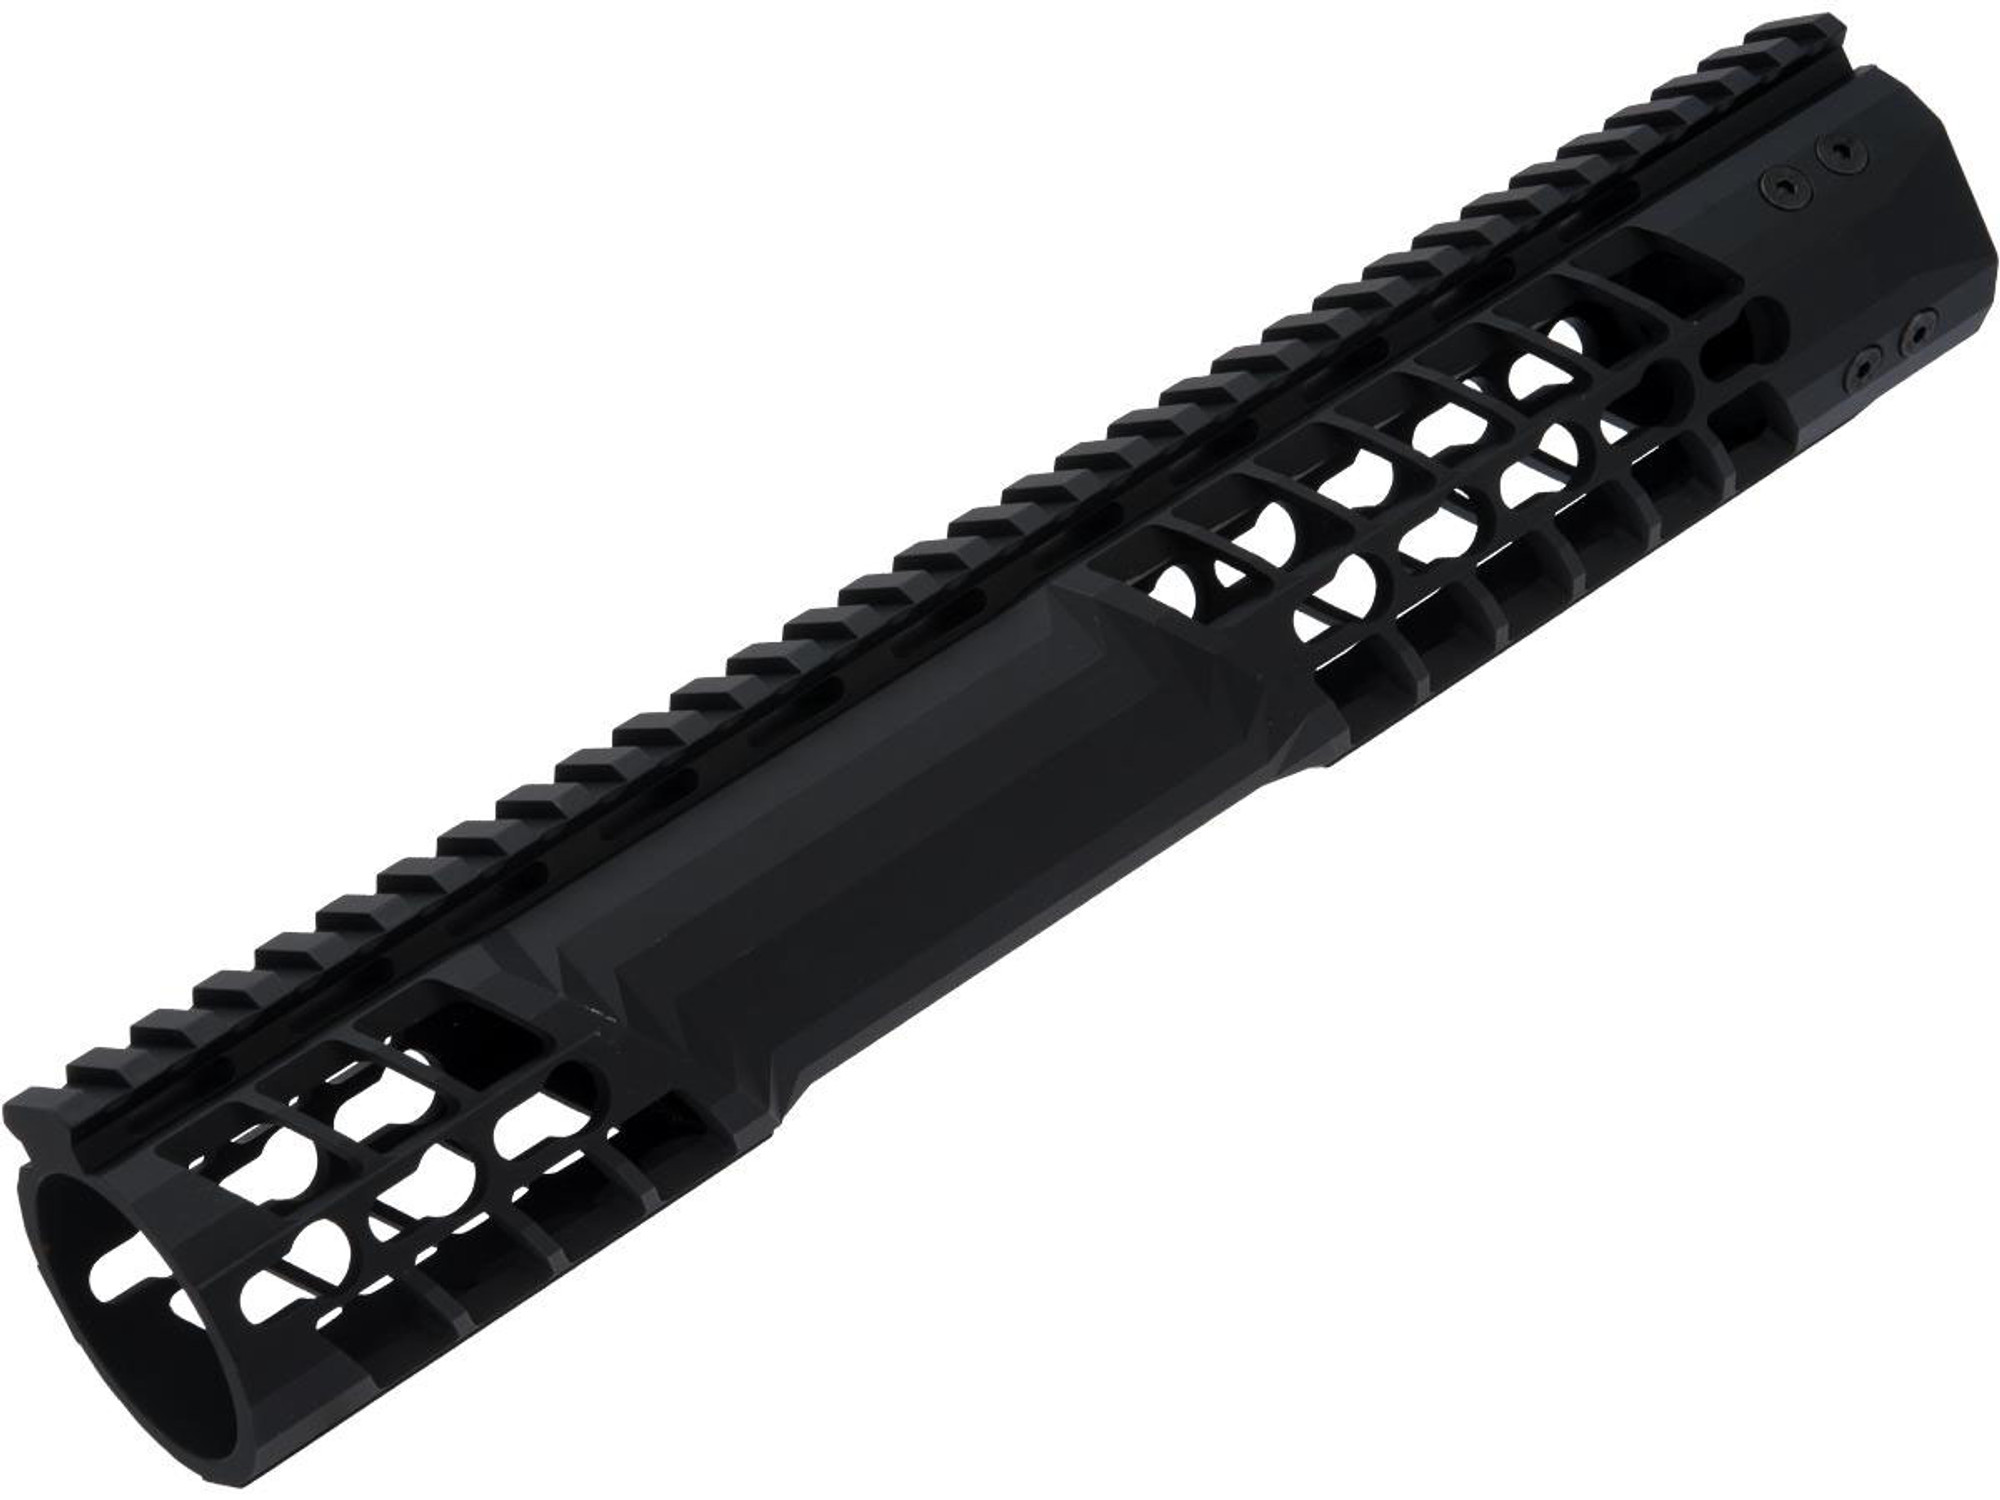 EMG F-1 Firearms Officially Licensed BDR Keymod Handguard for M4/M16 Series Airsoft AEGs (Color: Black / 12.75")